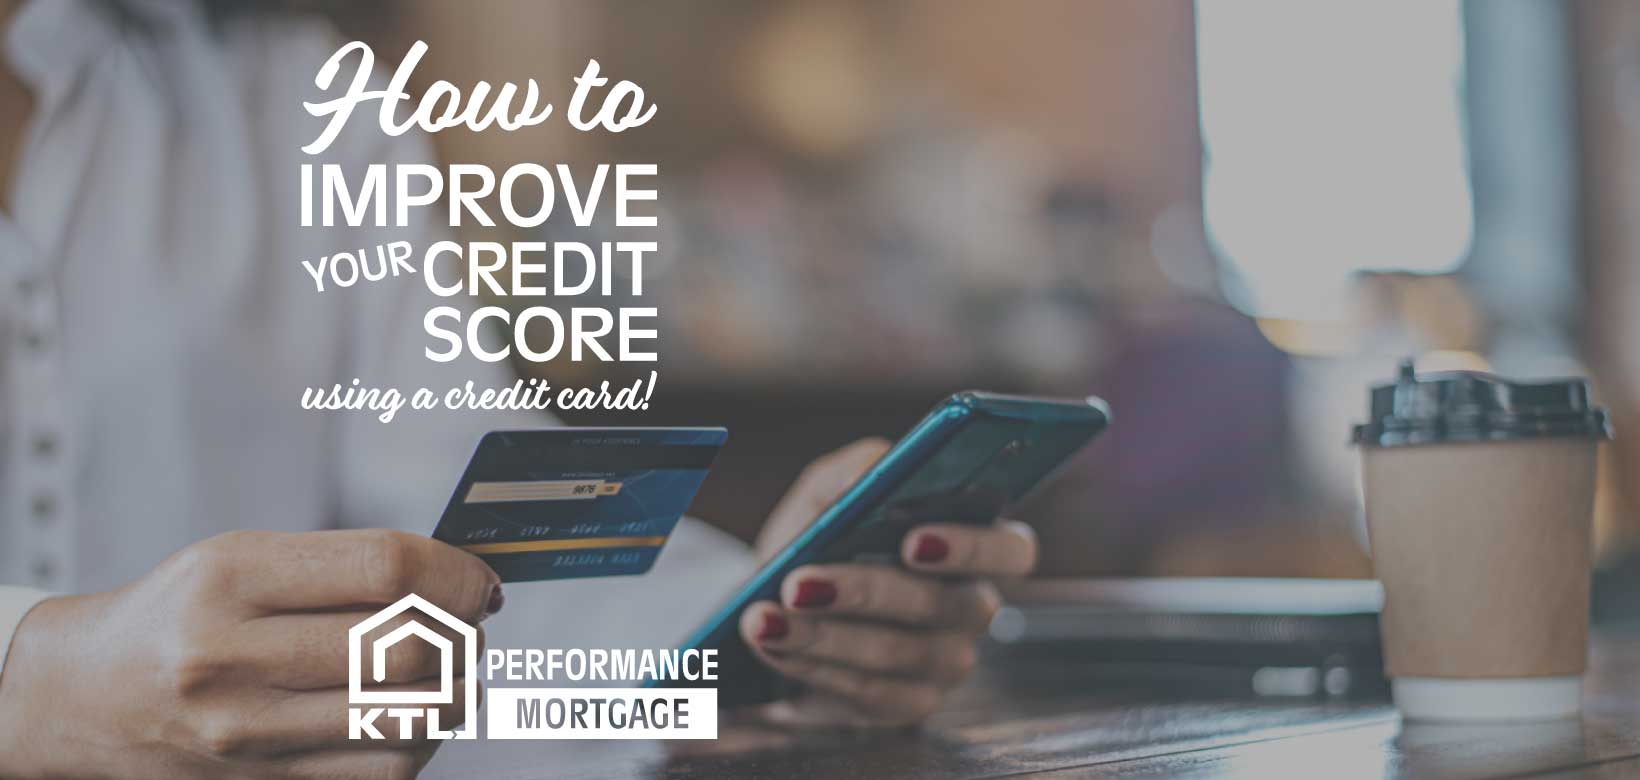 How-To-Improve-Credit-Score-Credit-Card